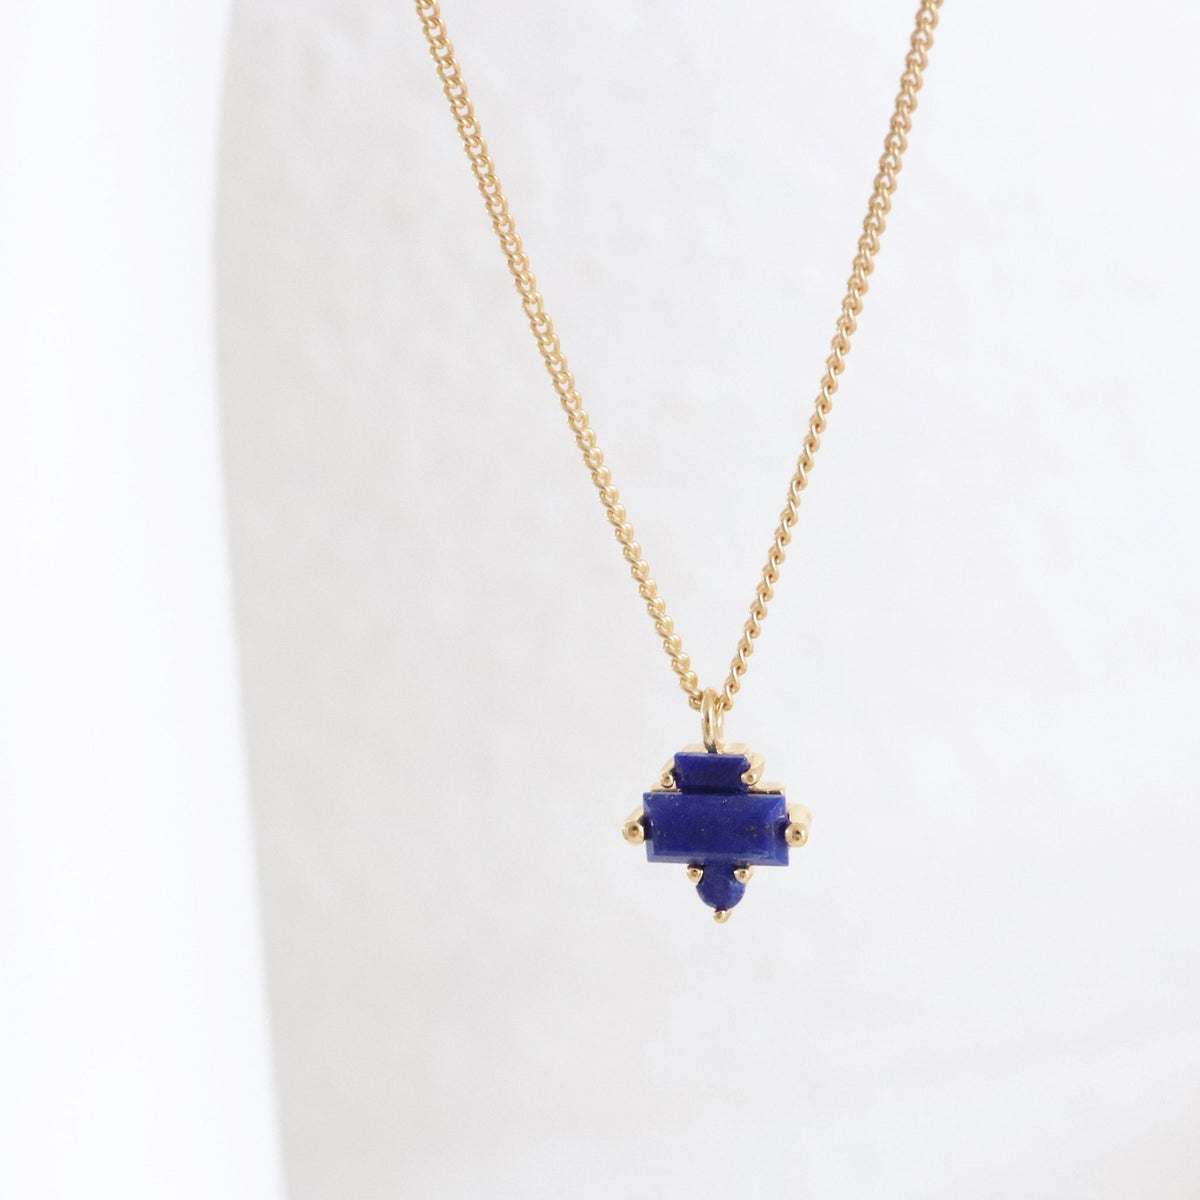 TINY LOYAL PRISM NECKLACE - LAPIS &amp; GOLD - SO PRETTY CARA COTTER